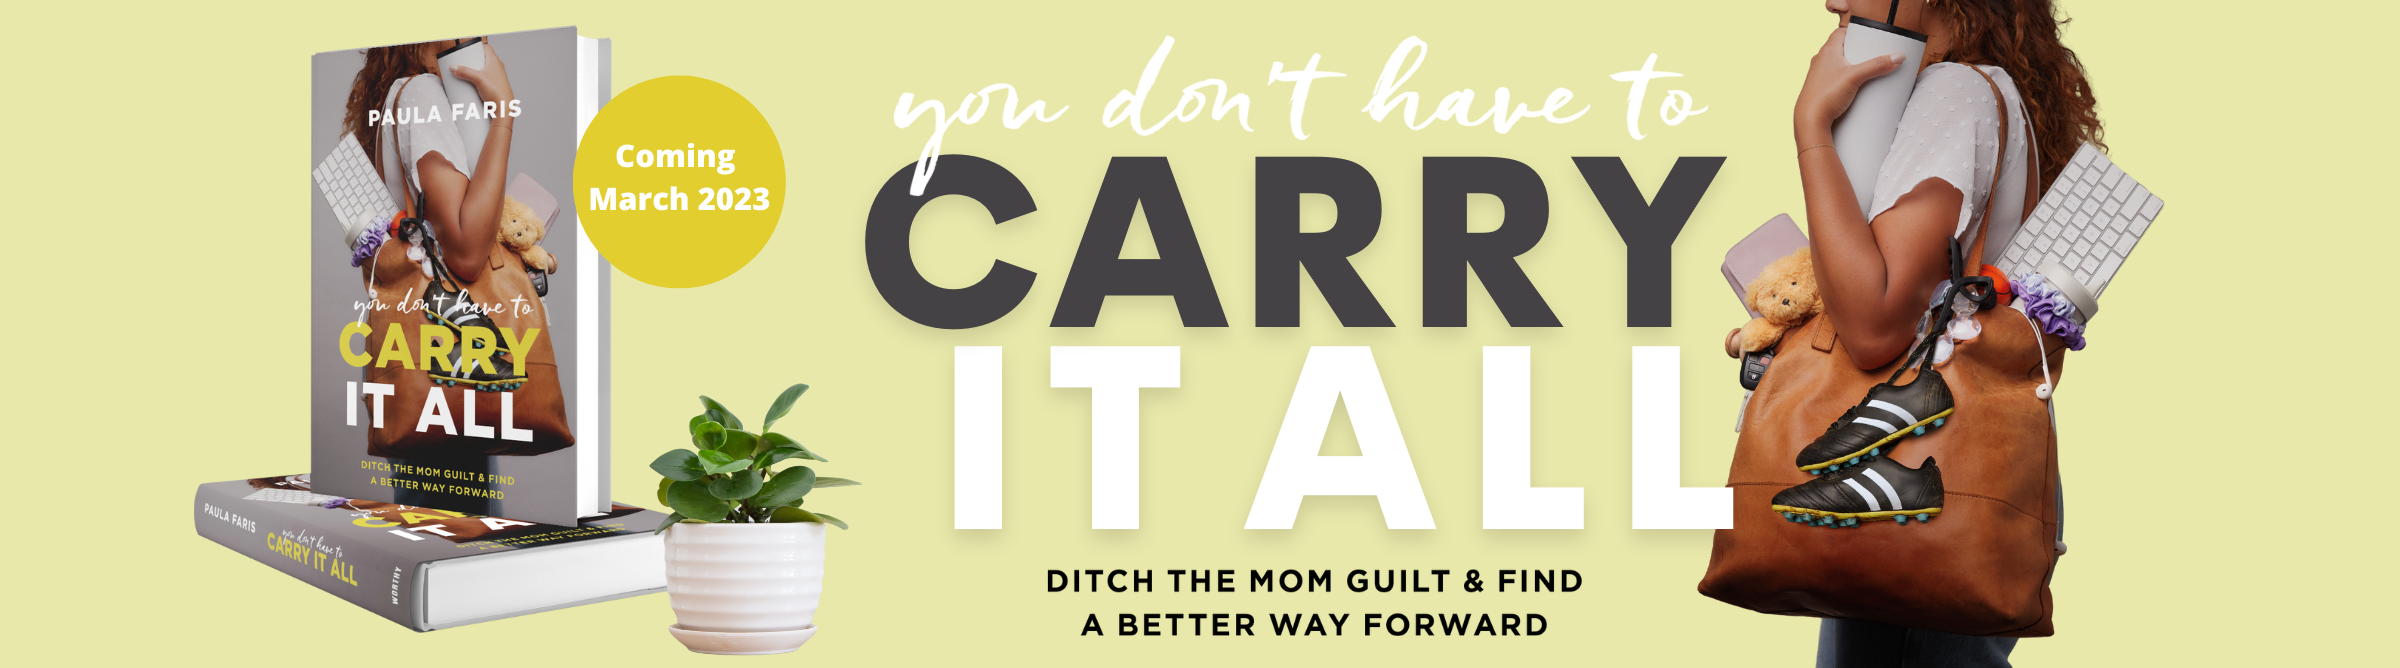 Book stack and text announcing new book from Paula Faris titled You Don't Have to Carry It All